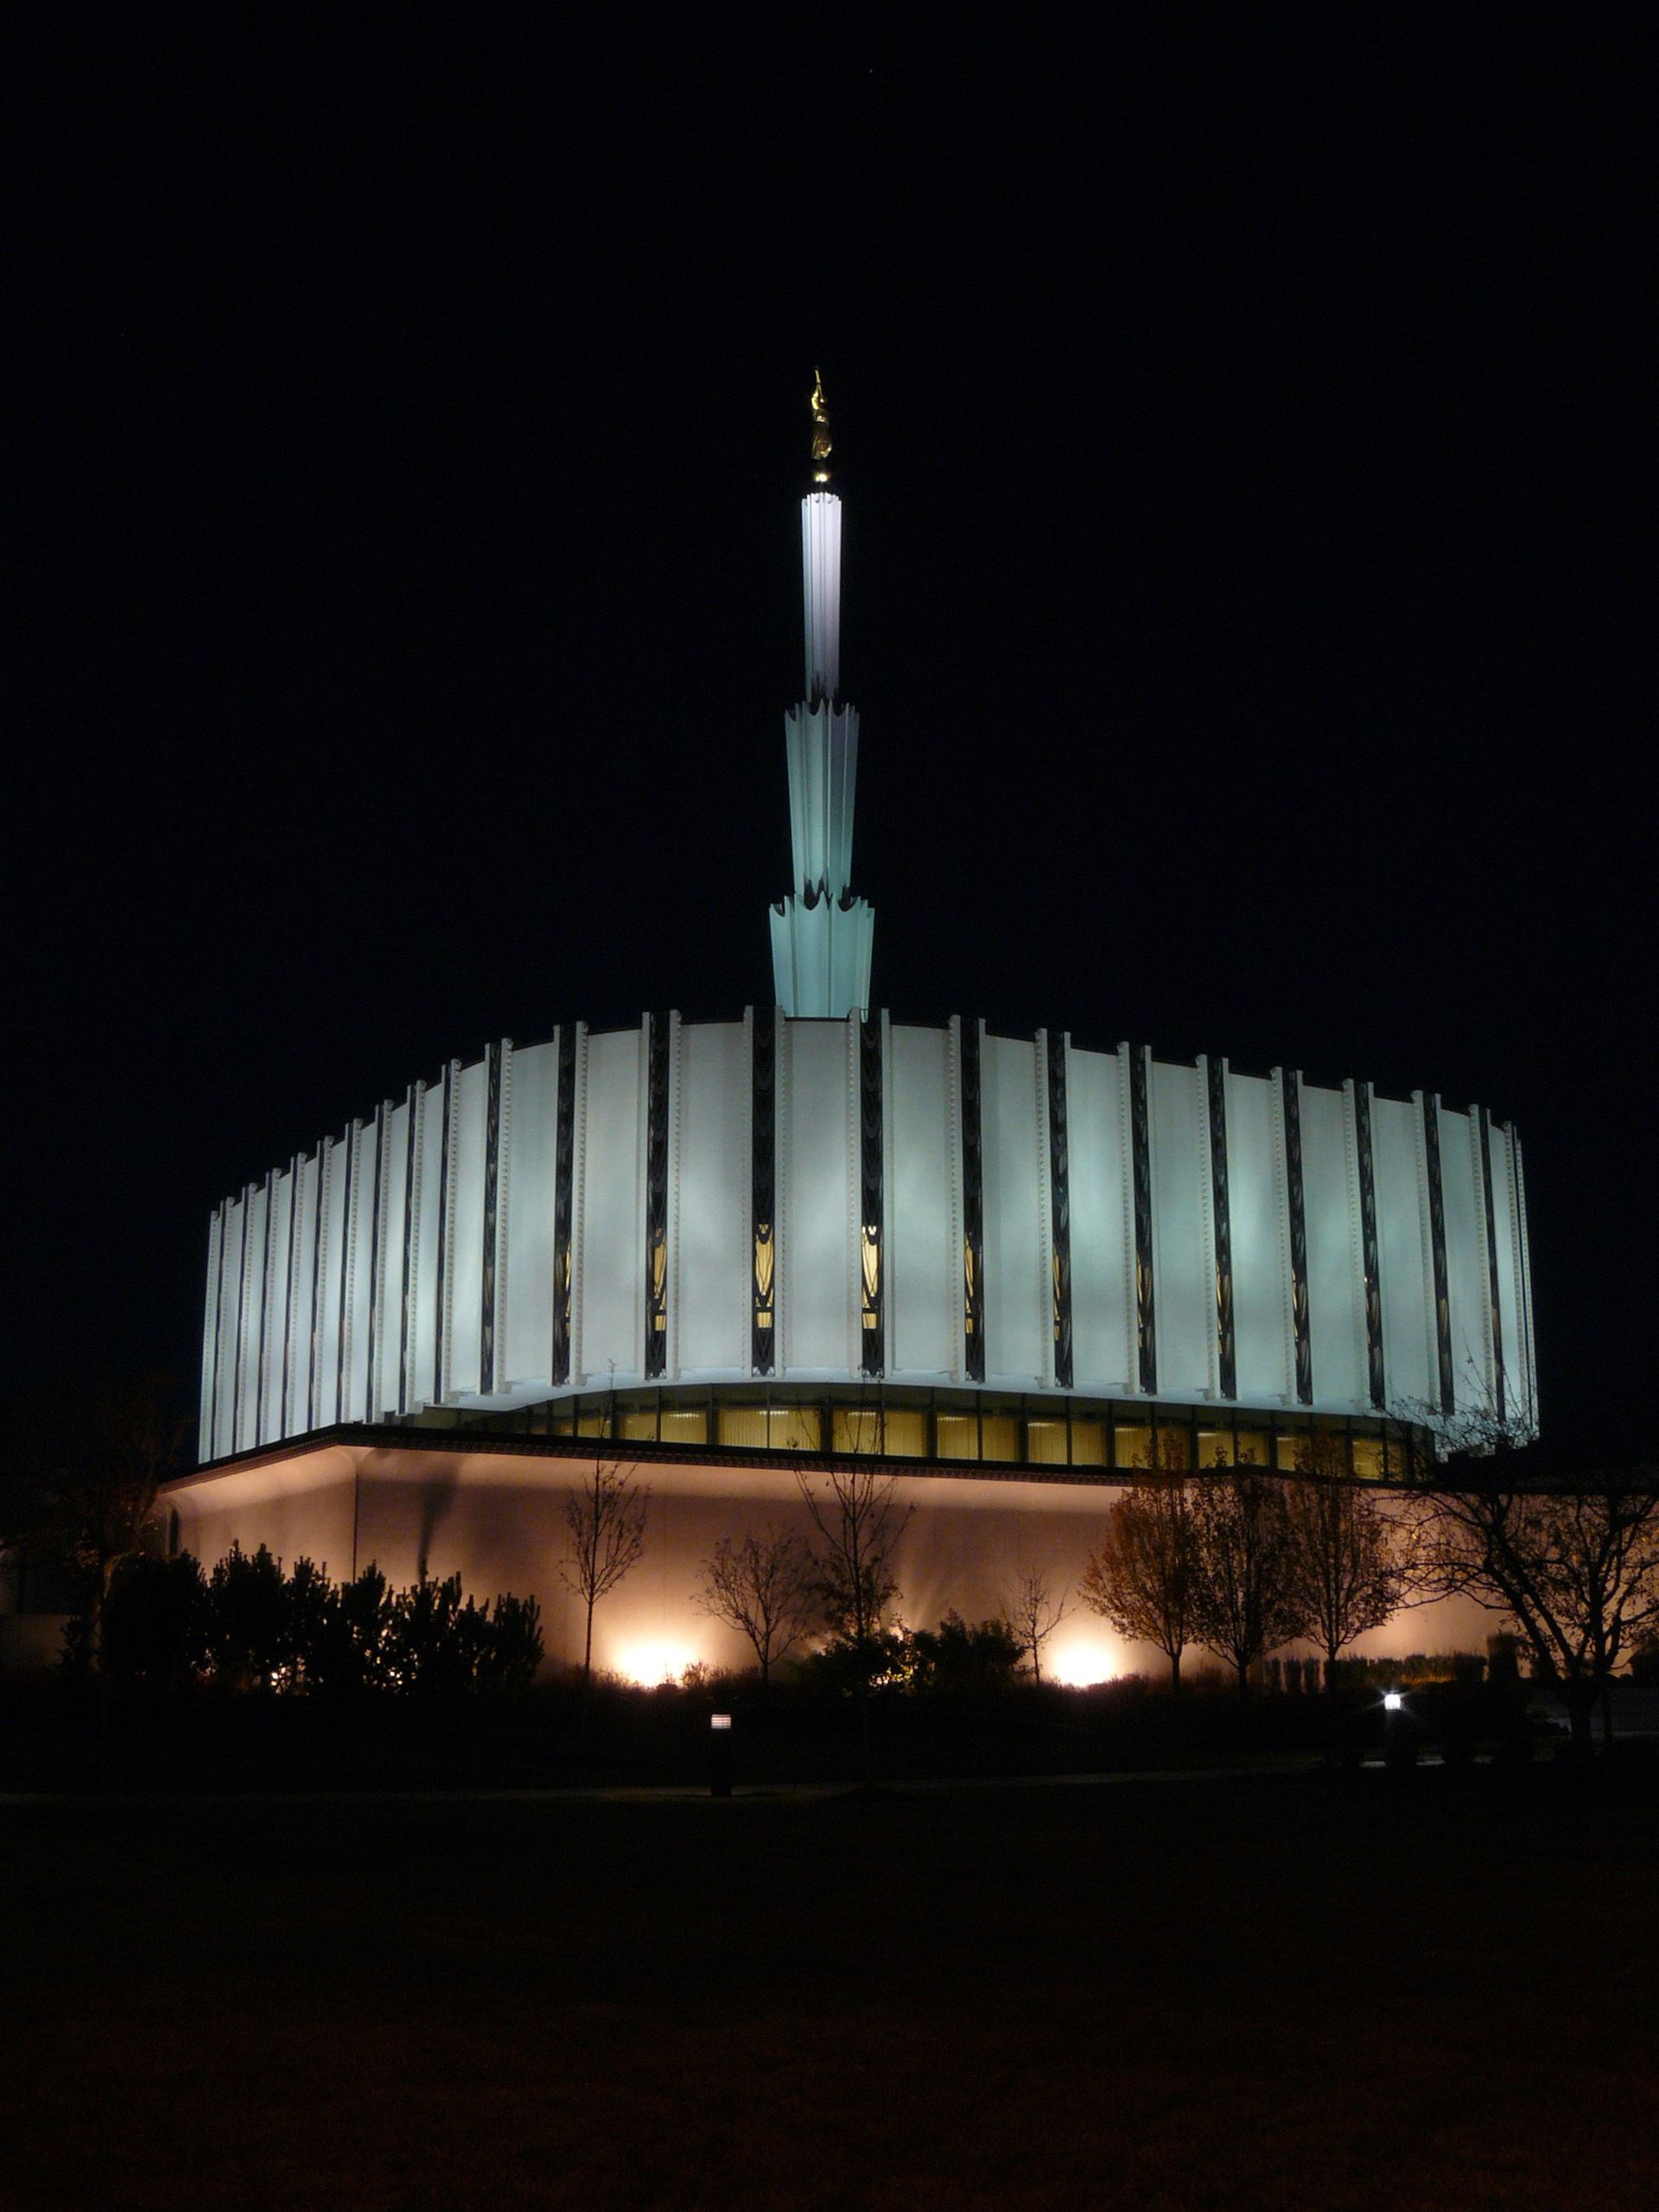 The old Ogden Utah Temple side view in the evening.